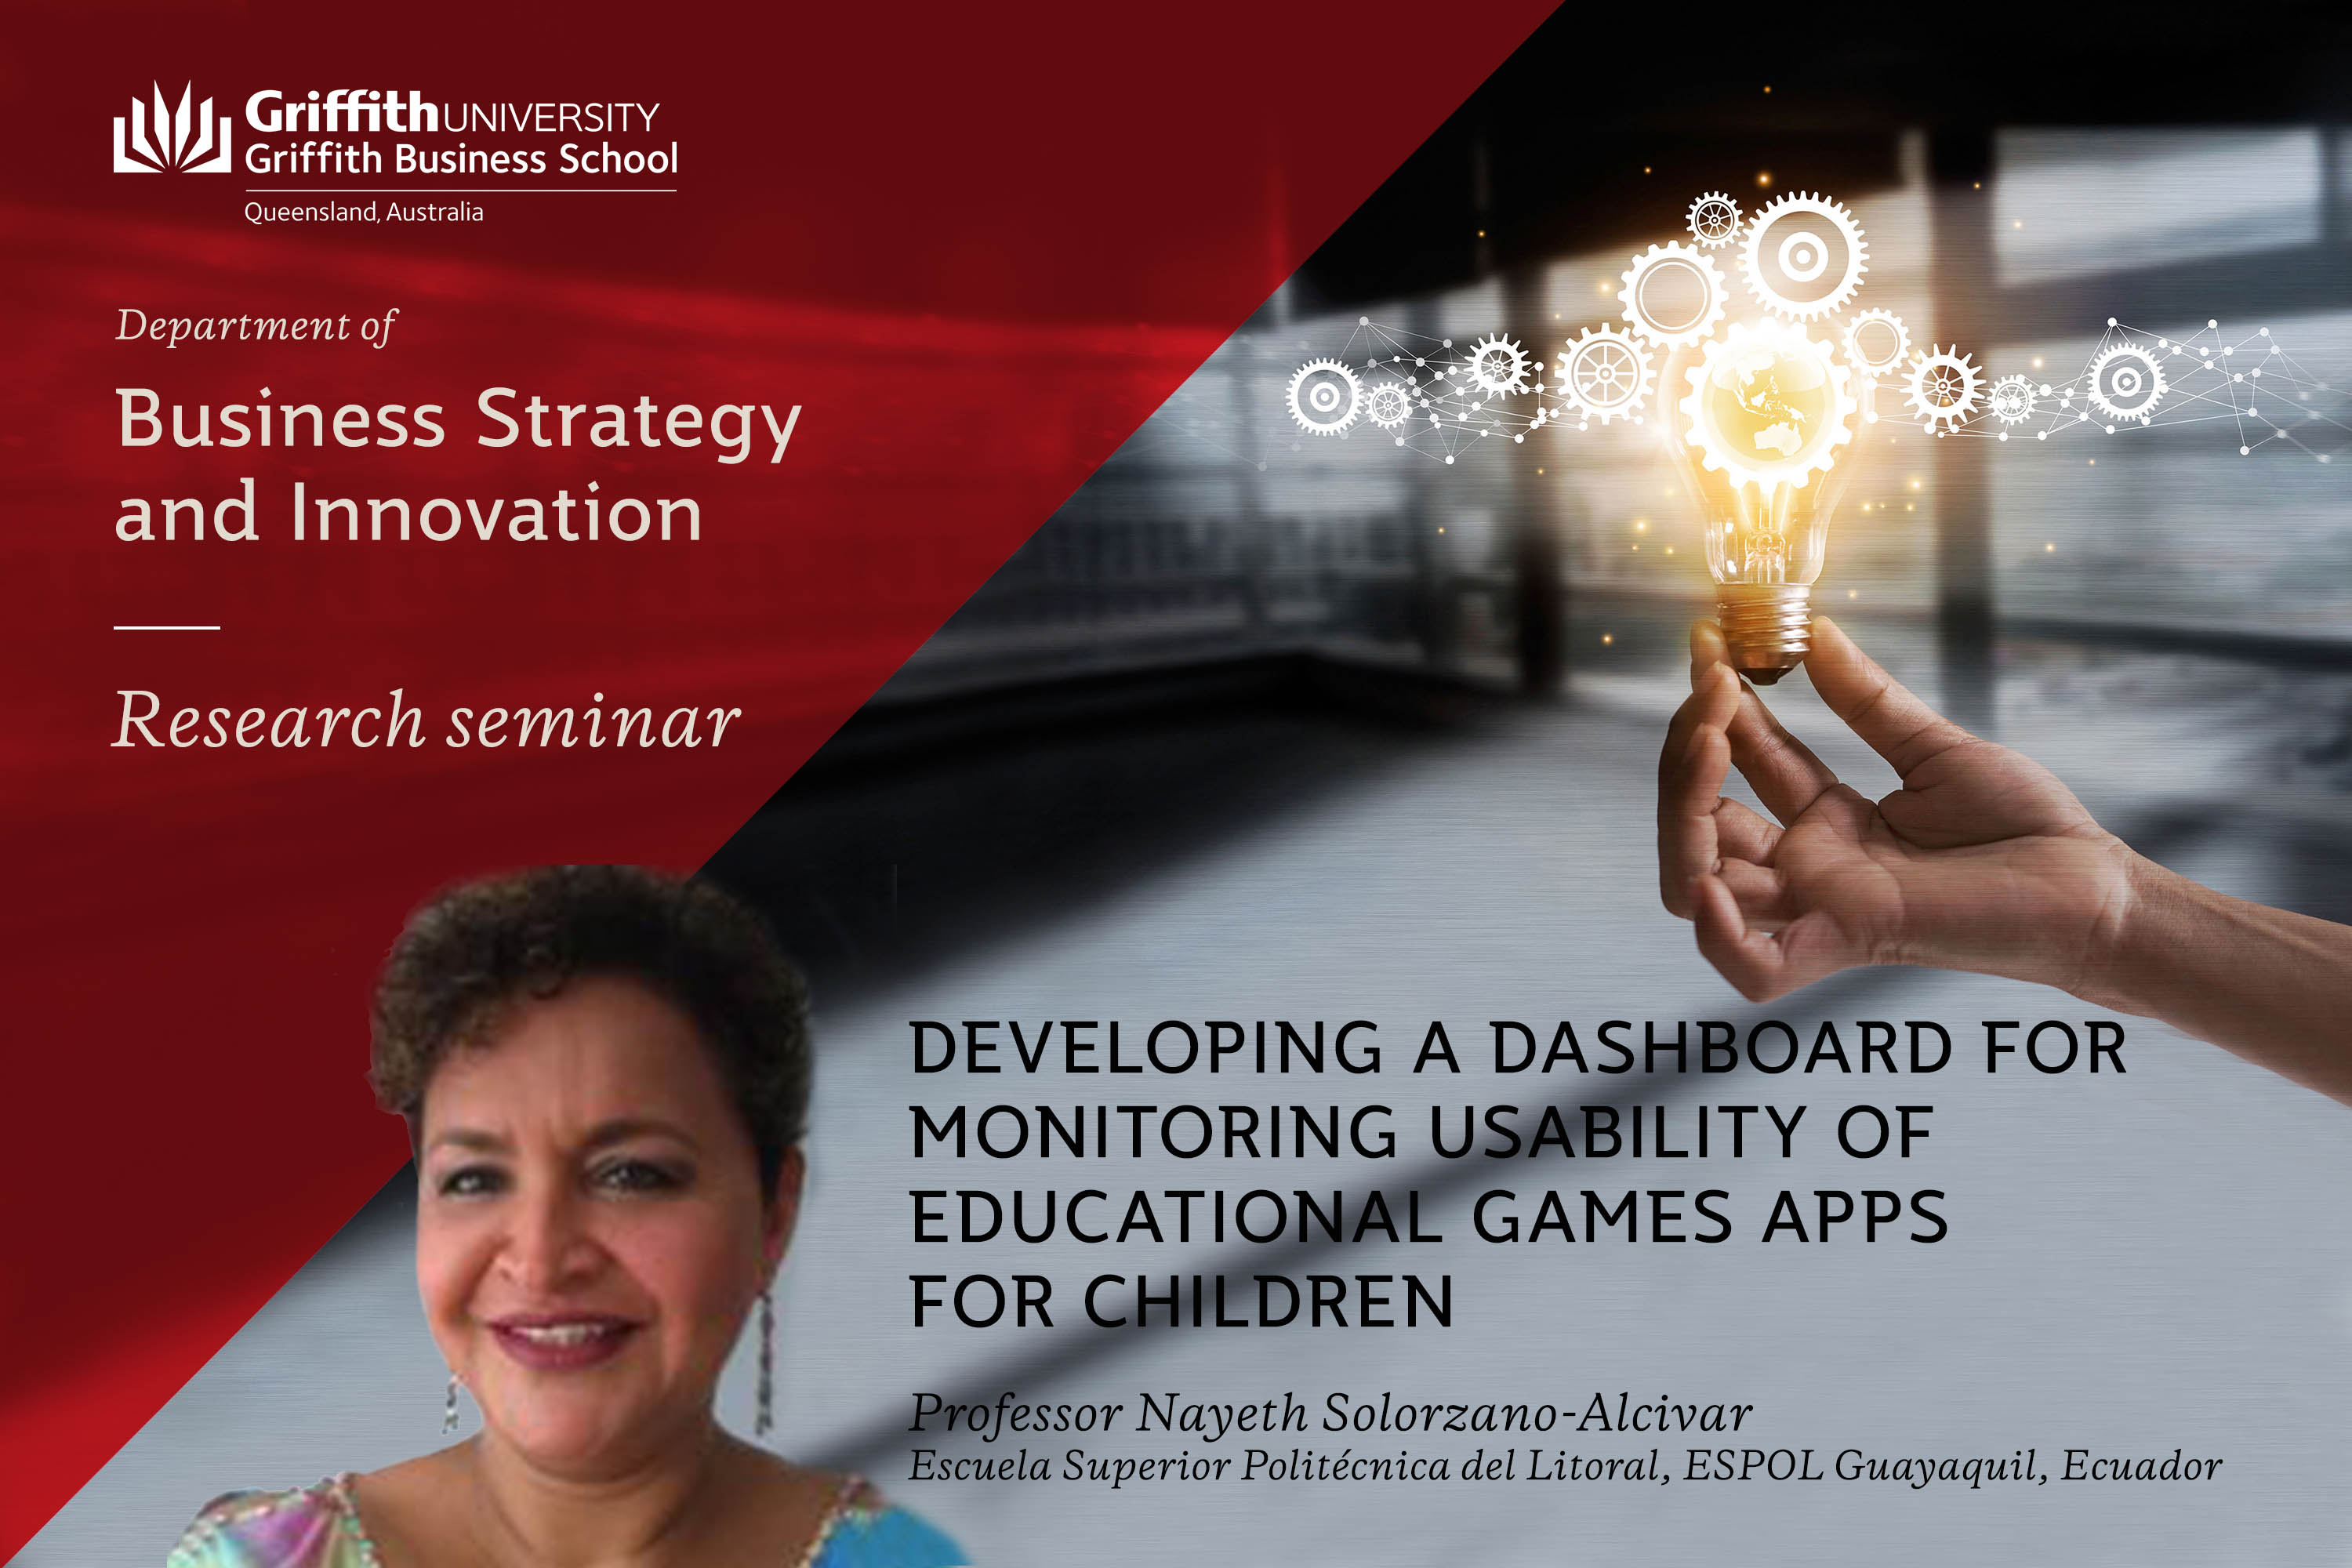 BSI Research Seminar: Developing a dashboard for monitoring usability of educational games apps for children